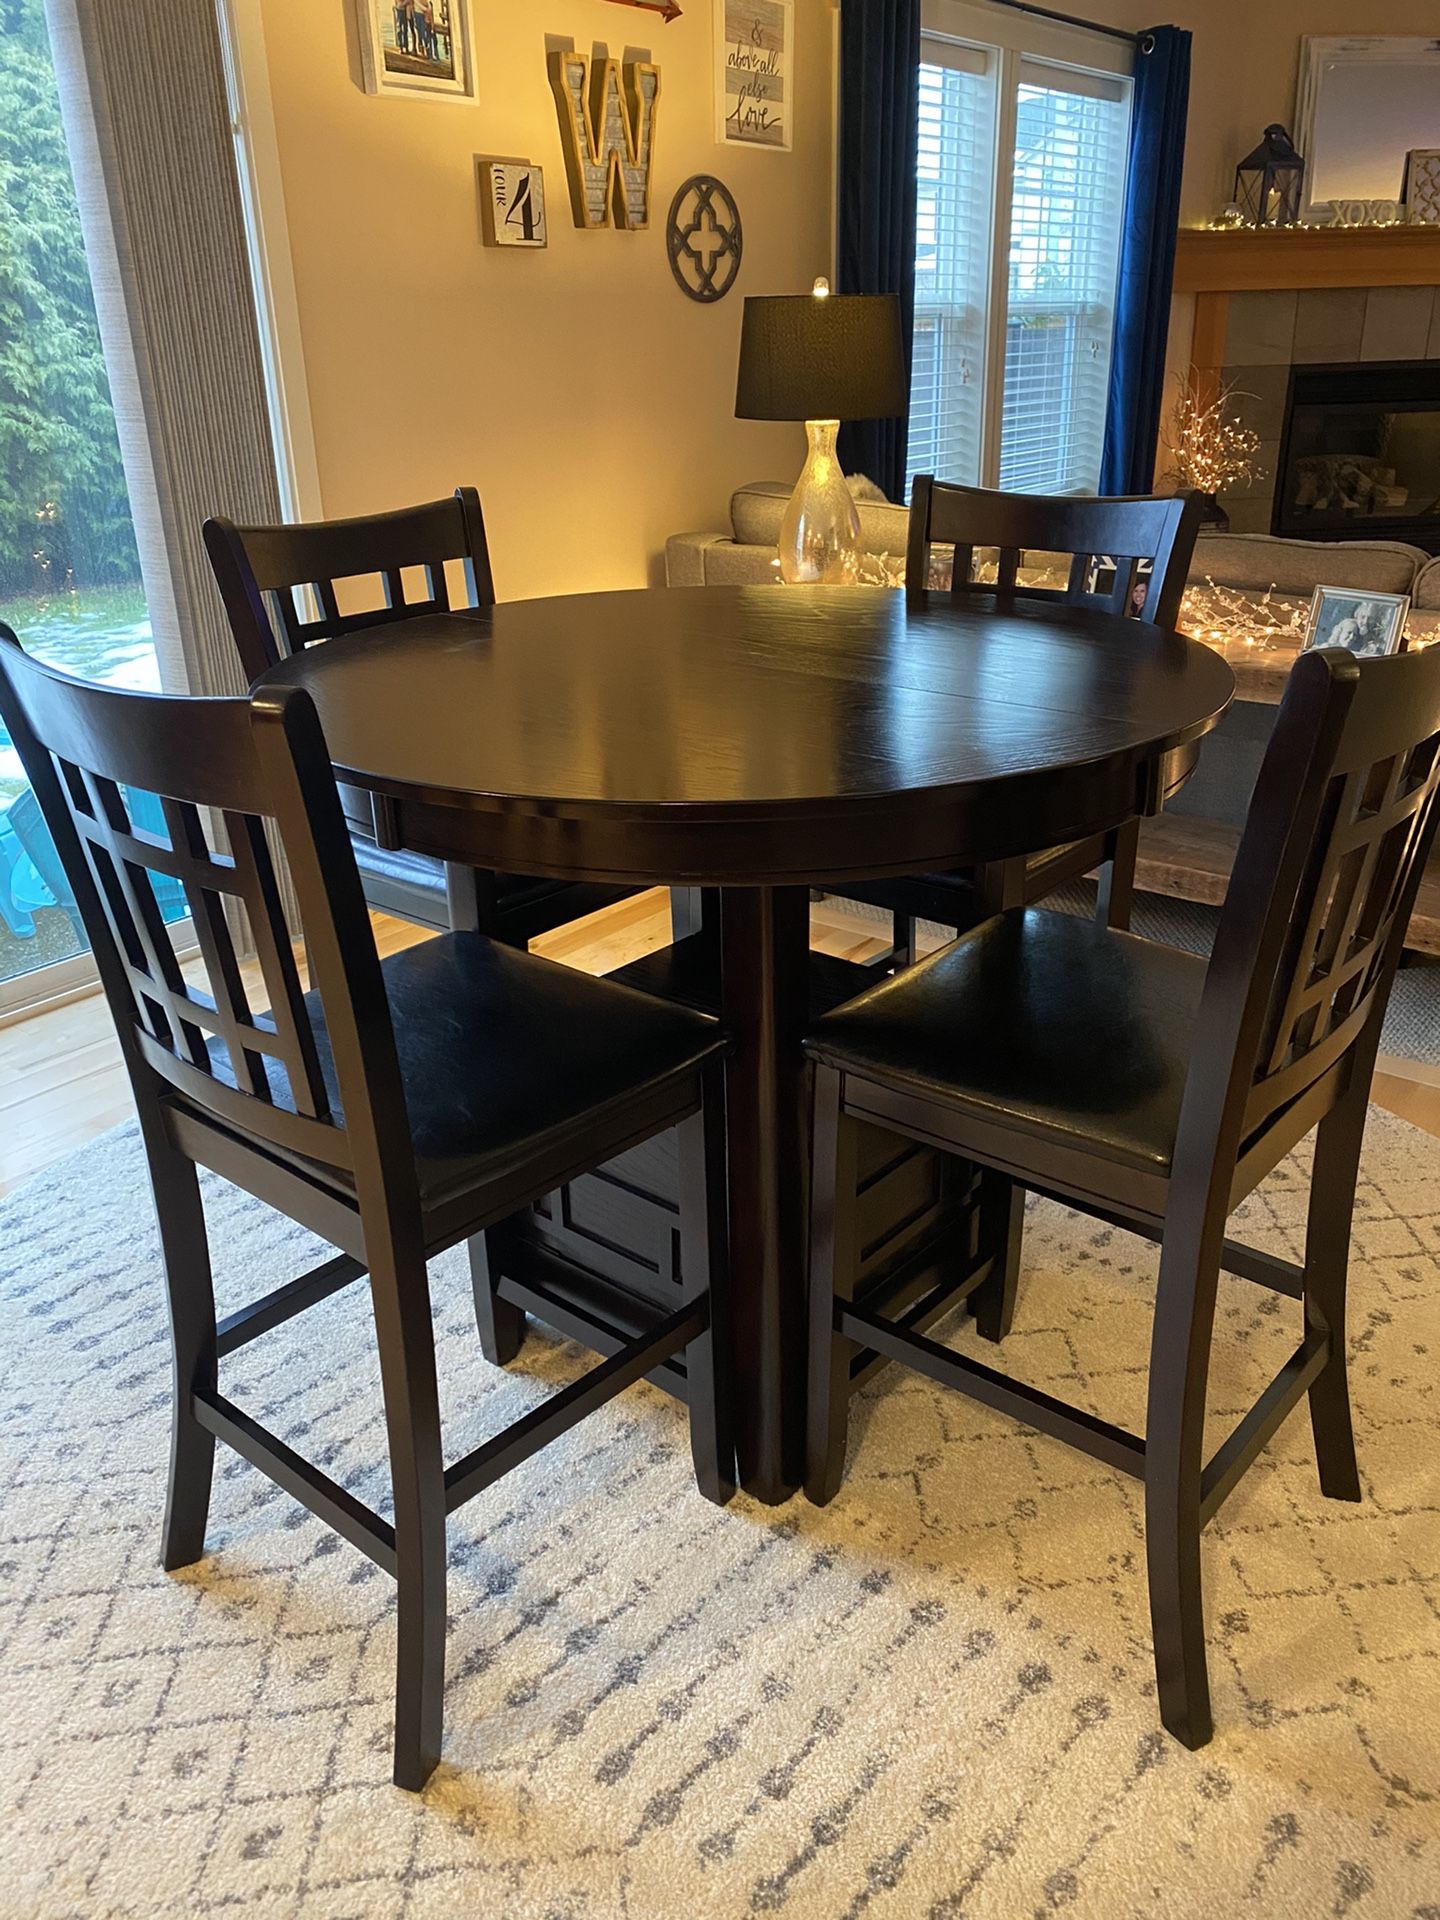 PENDING: Kitchen table w/4 chairs (bar height)